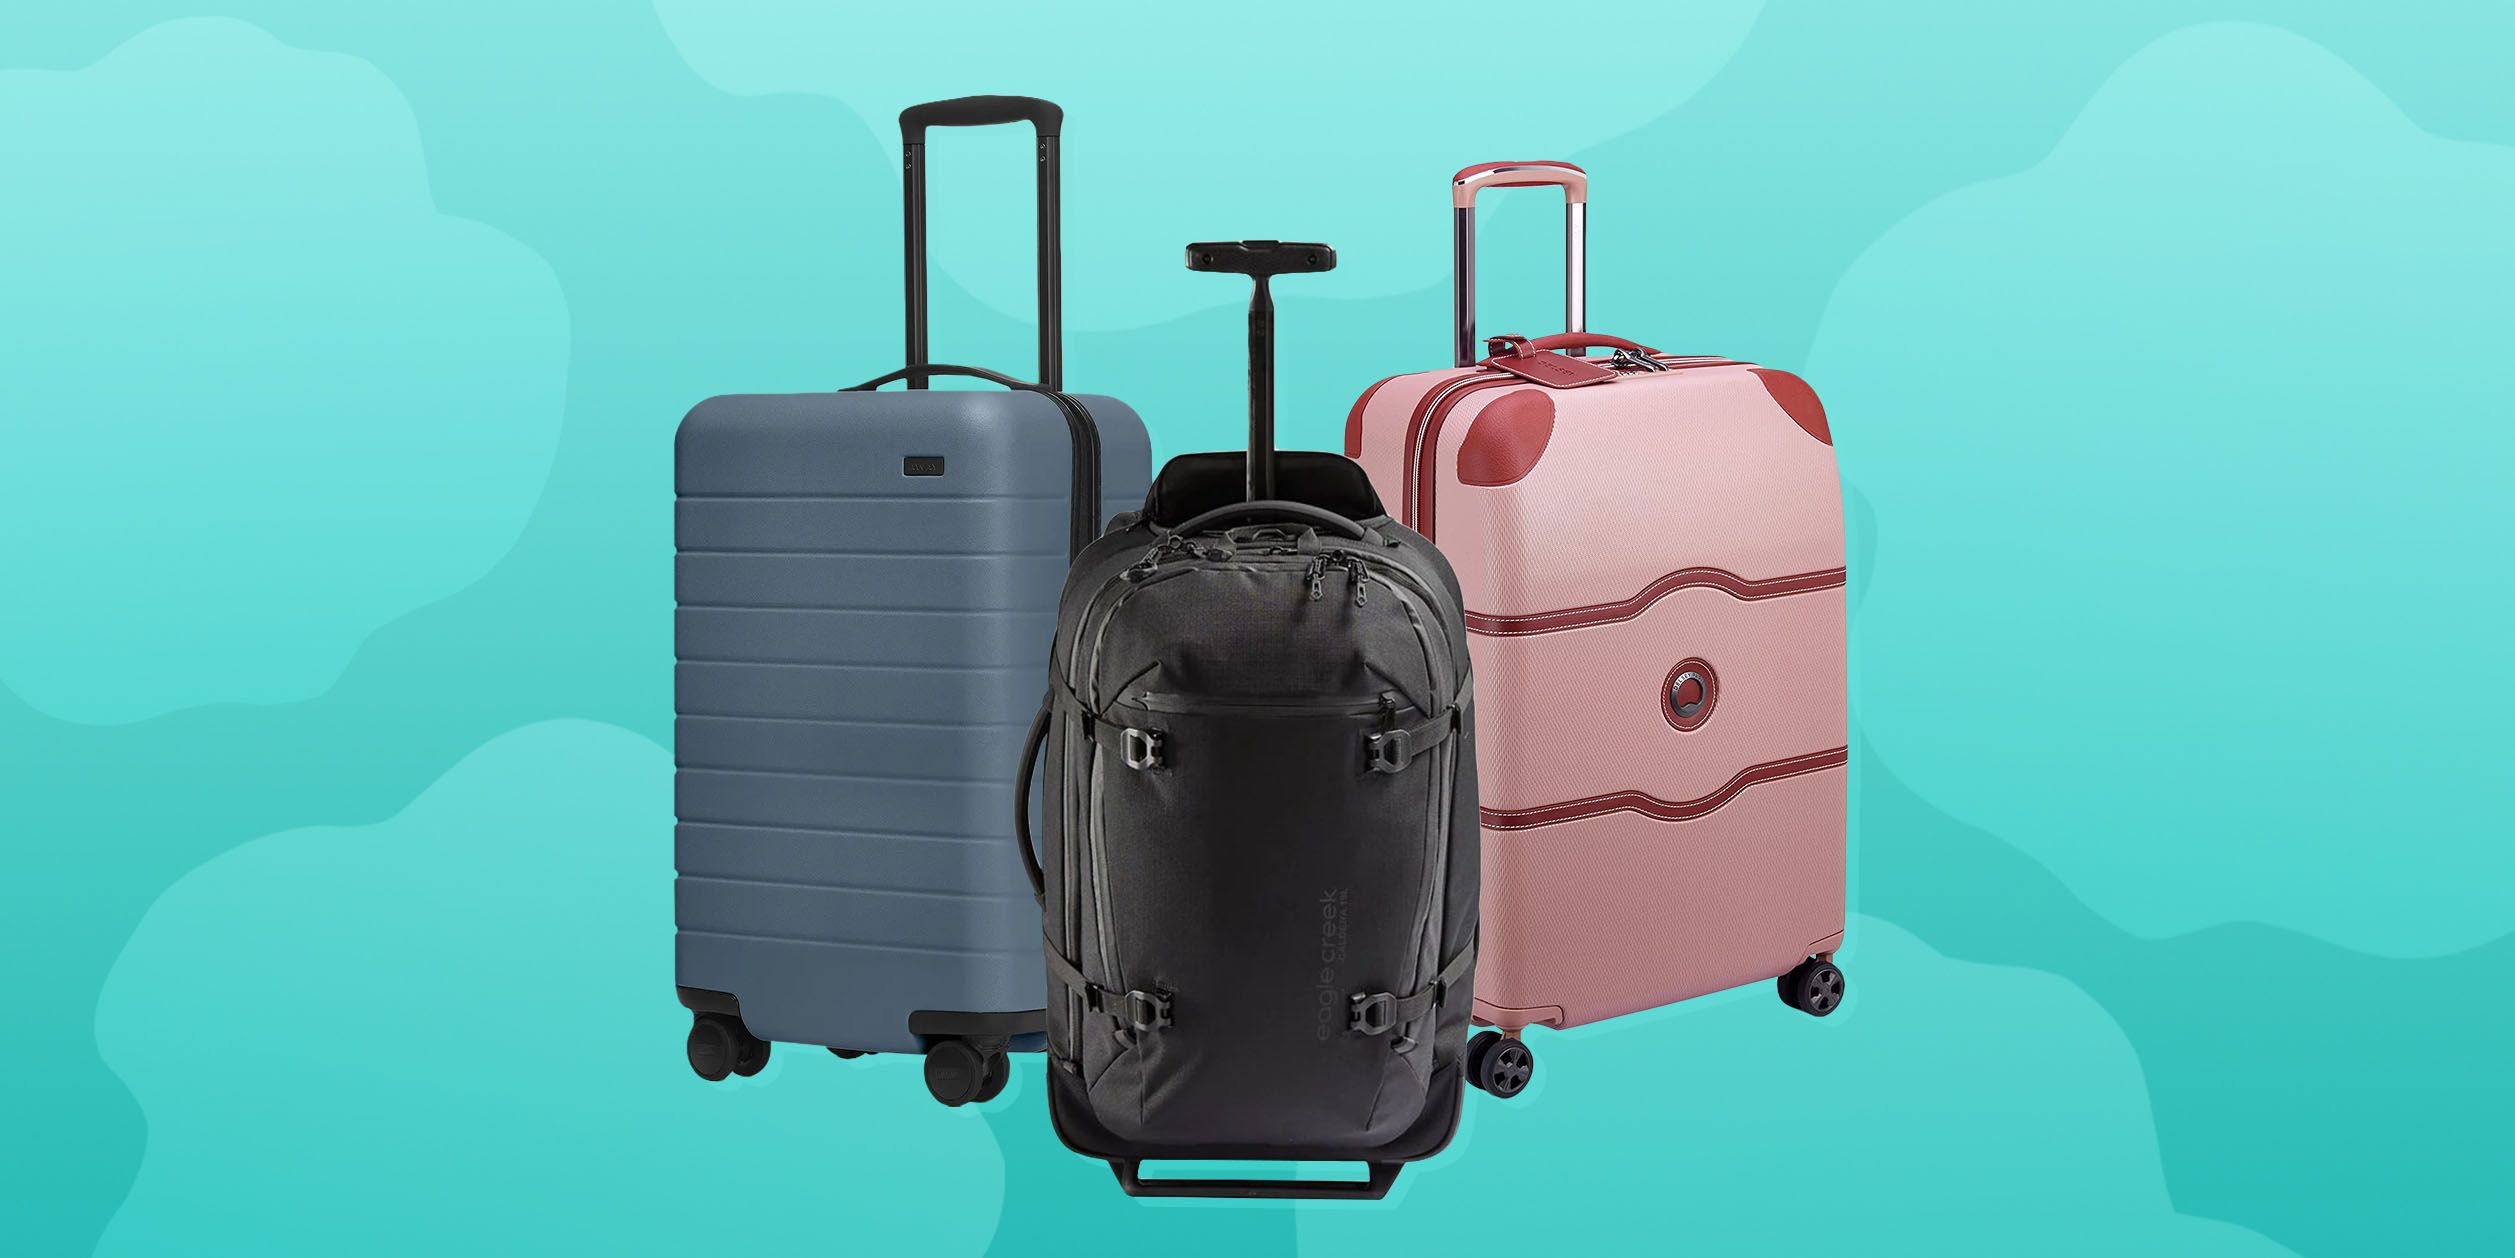 Gering Transparant stikstof The 7 Best Luggage Brands for 2022 - Best Suitcase Brands